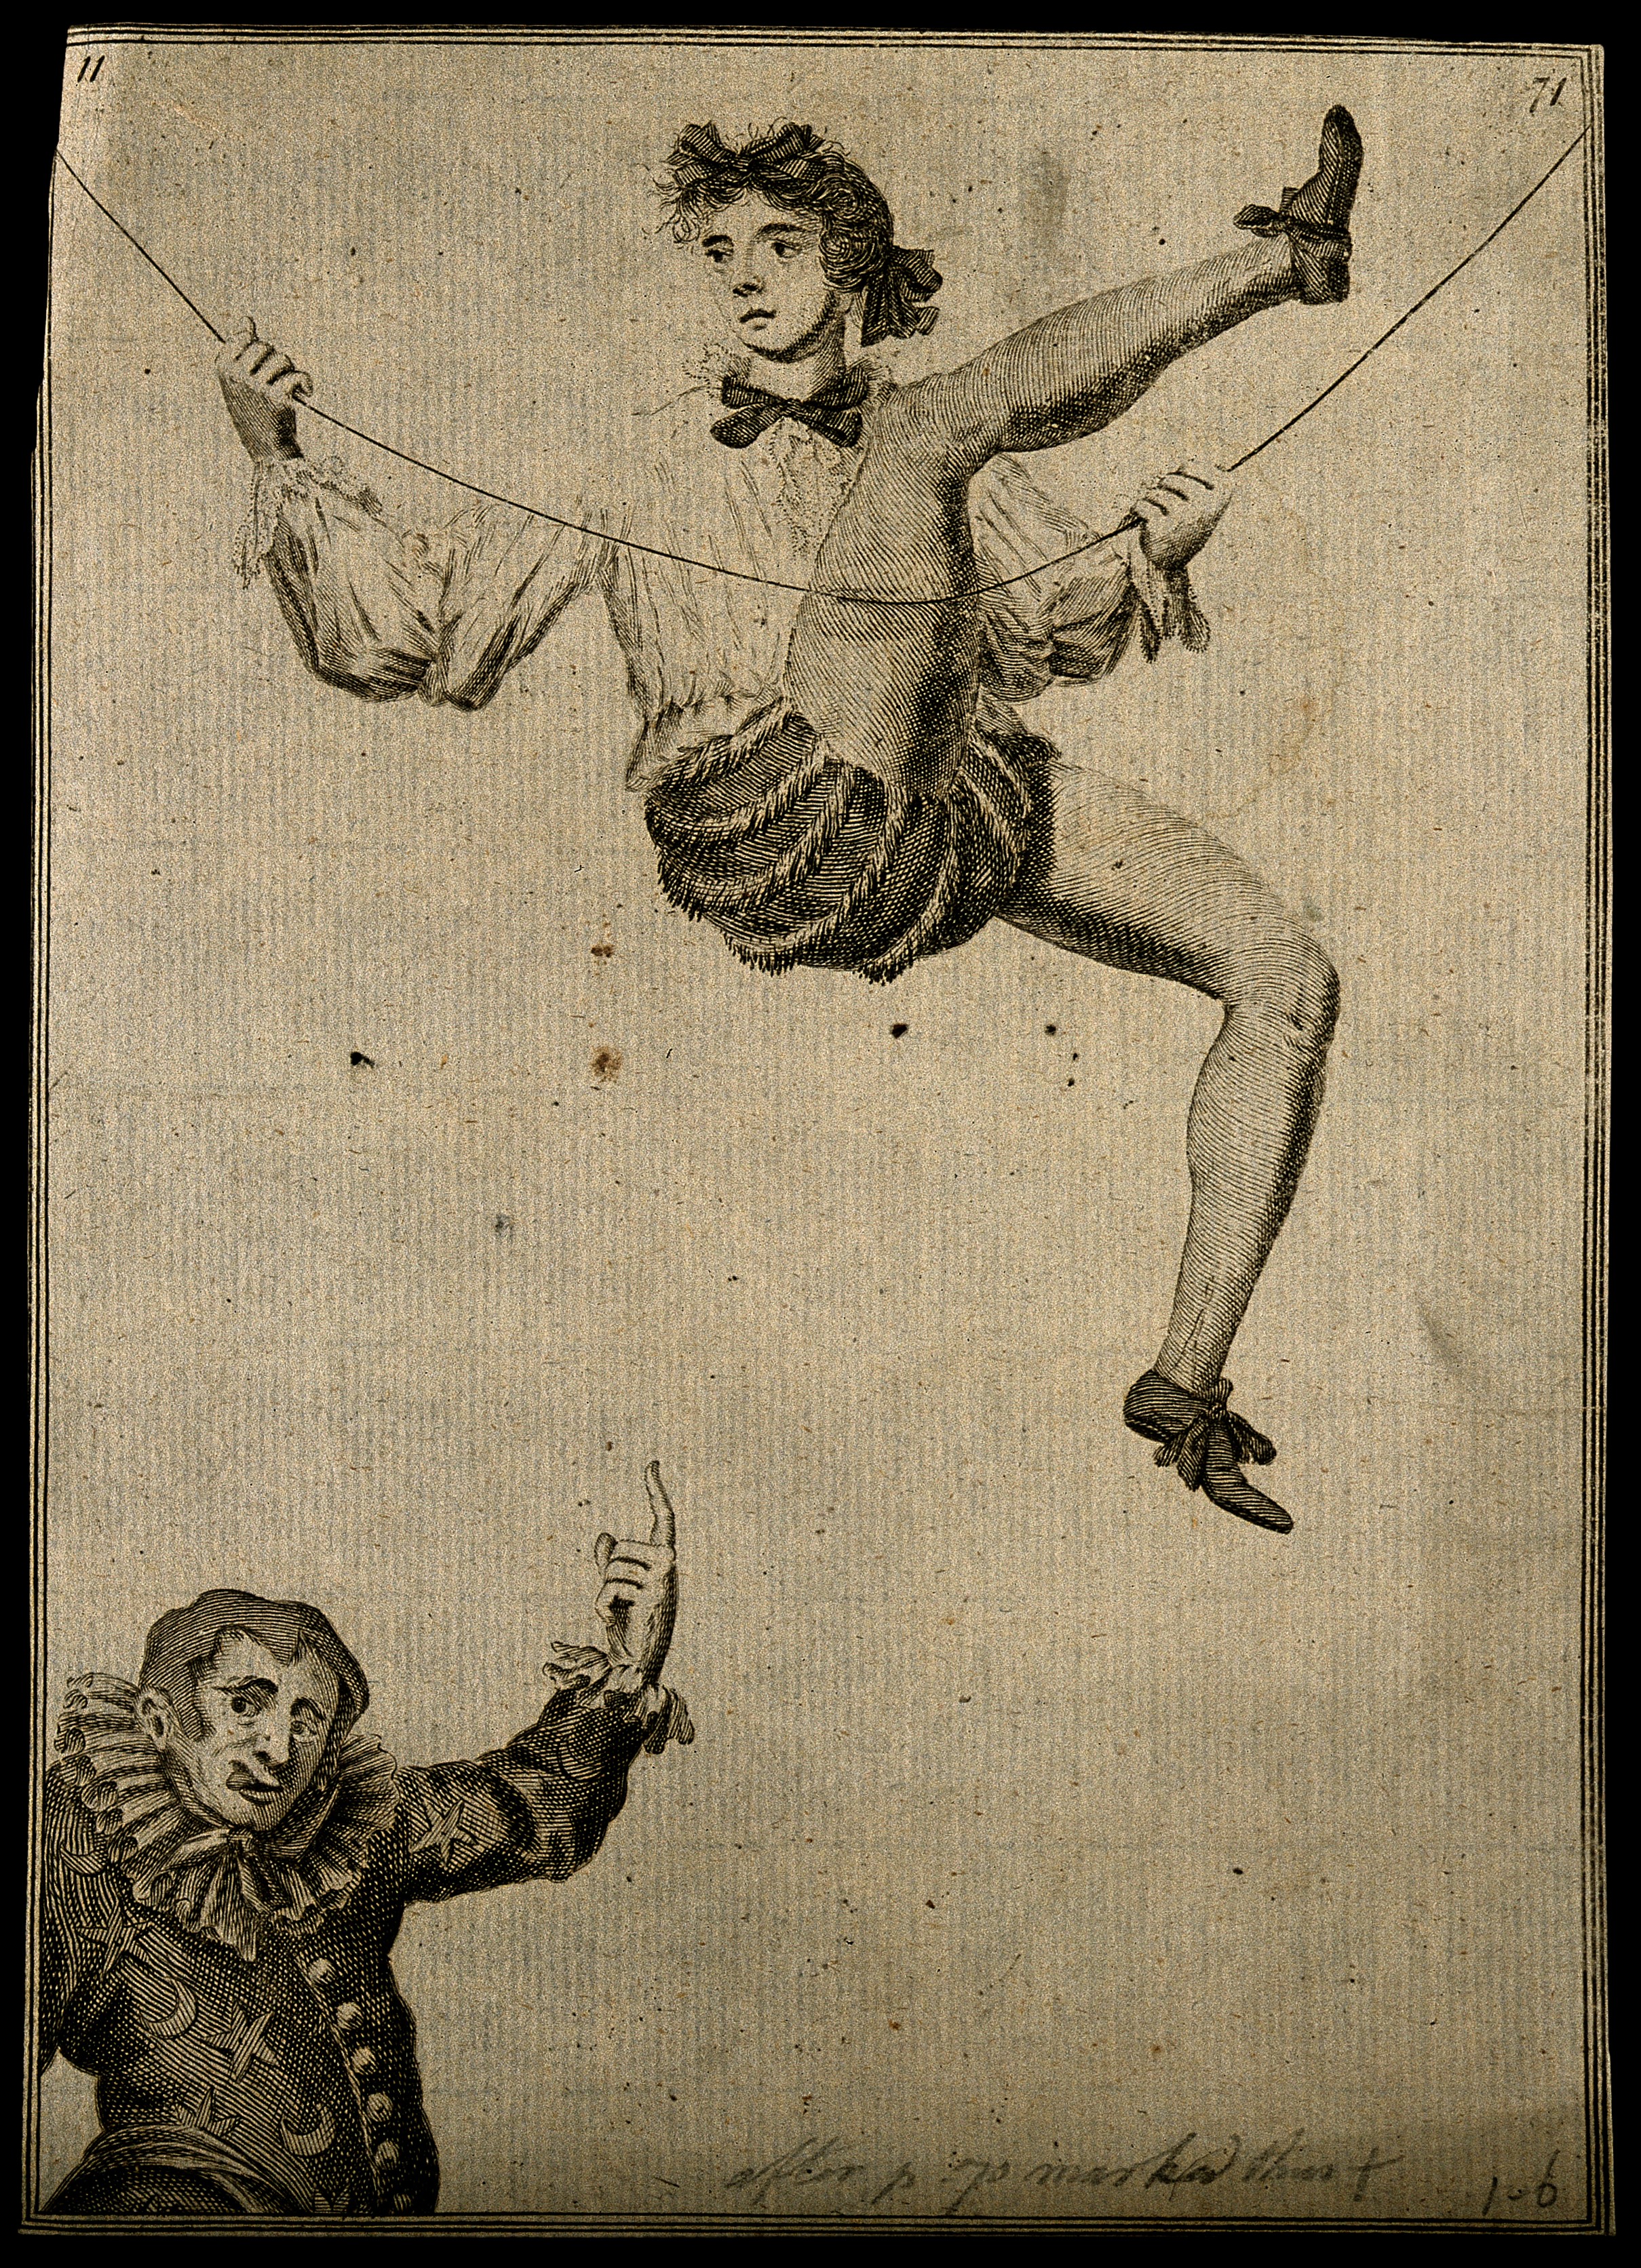 File:A tightrope walker above a clown. Engraving. Wellcome